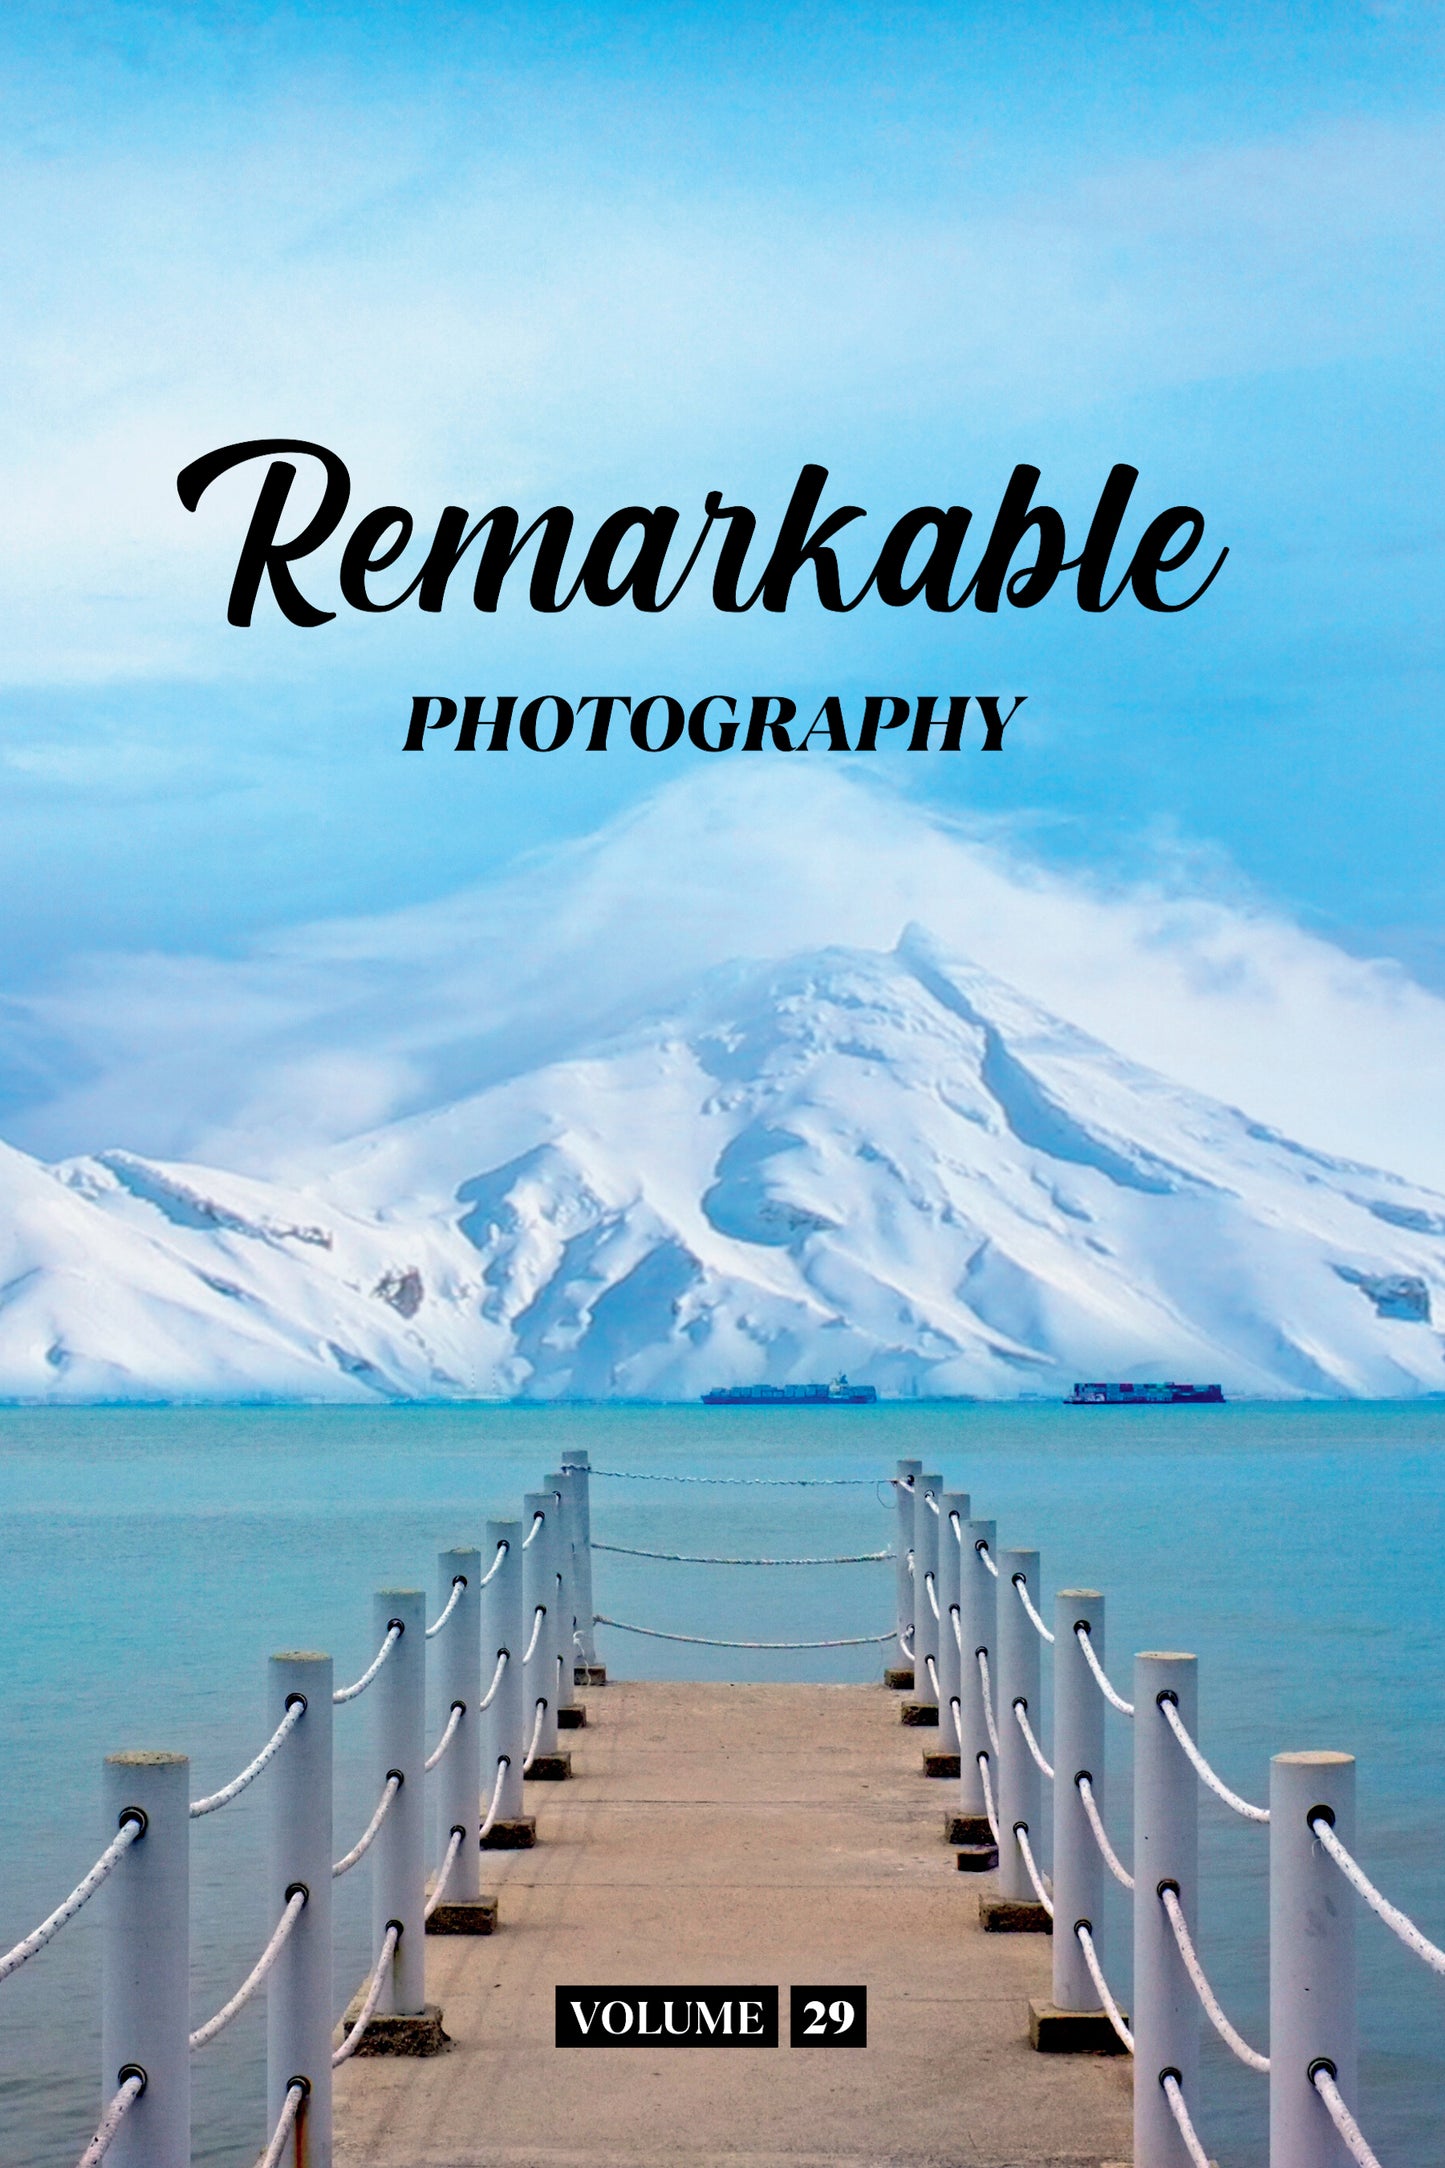 Remarkable Photography Volume 29 (Physical Book Pre-Order)